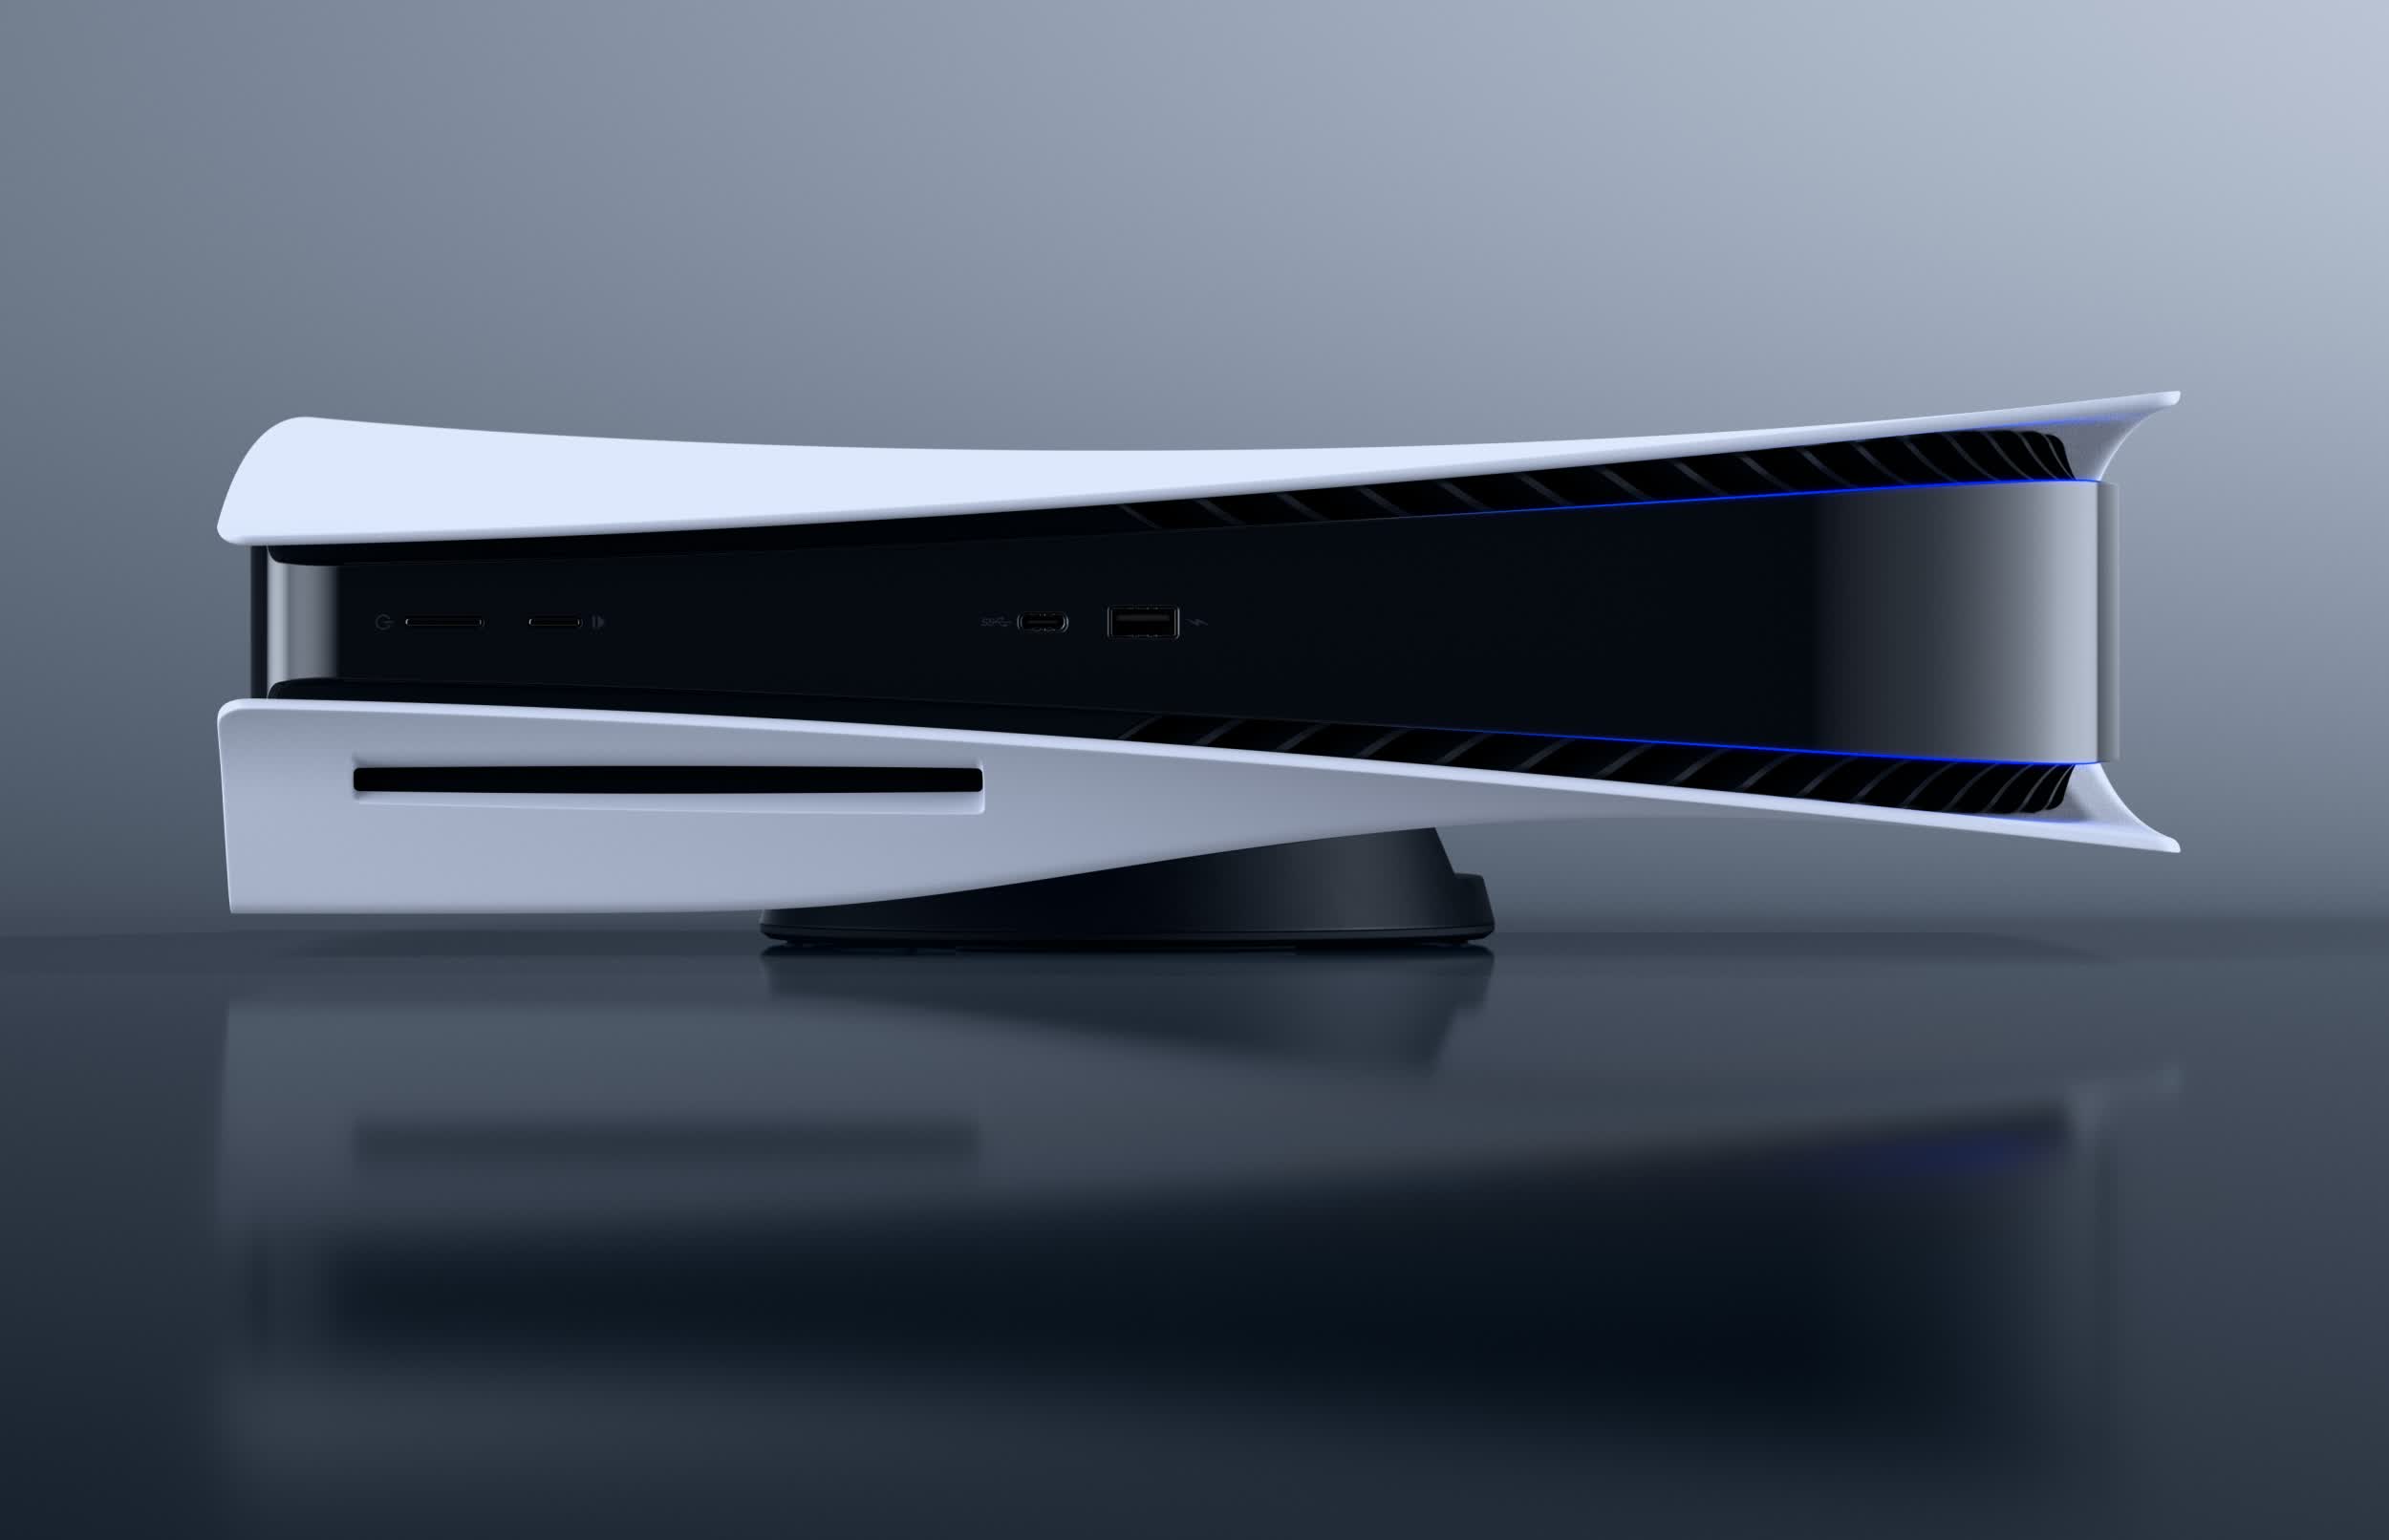 PlayStation 5 designer: In the beginning, it was much larger